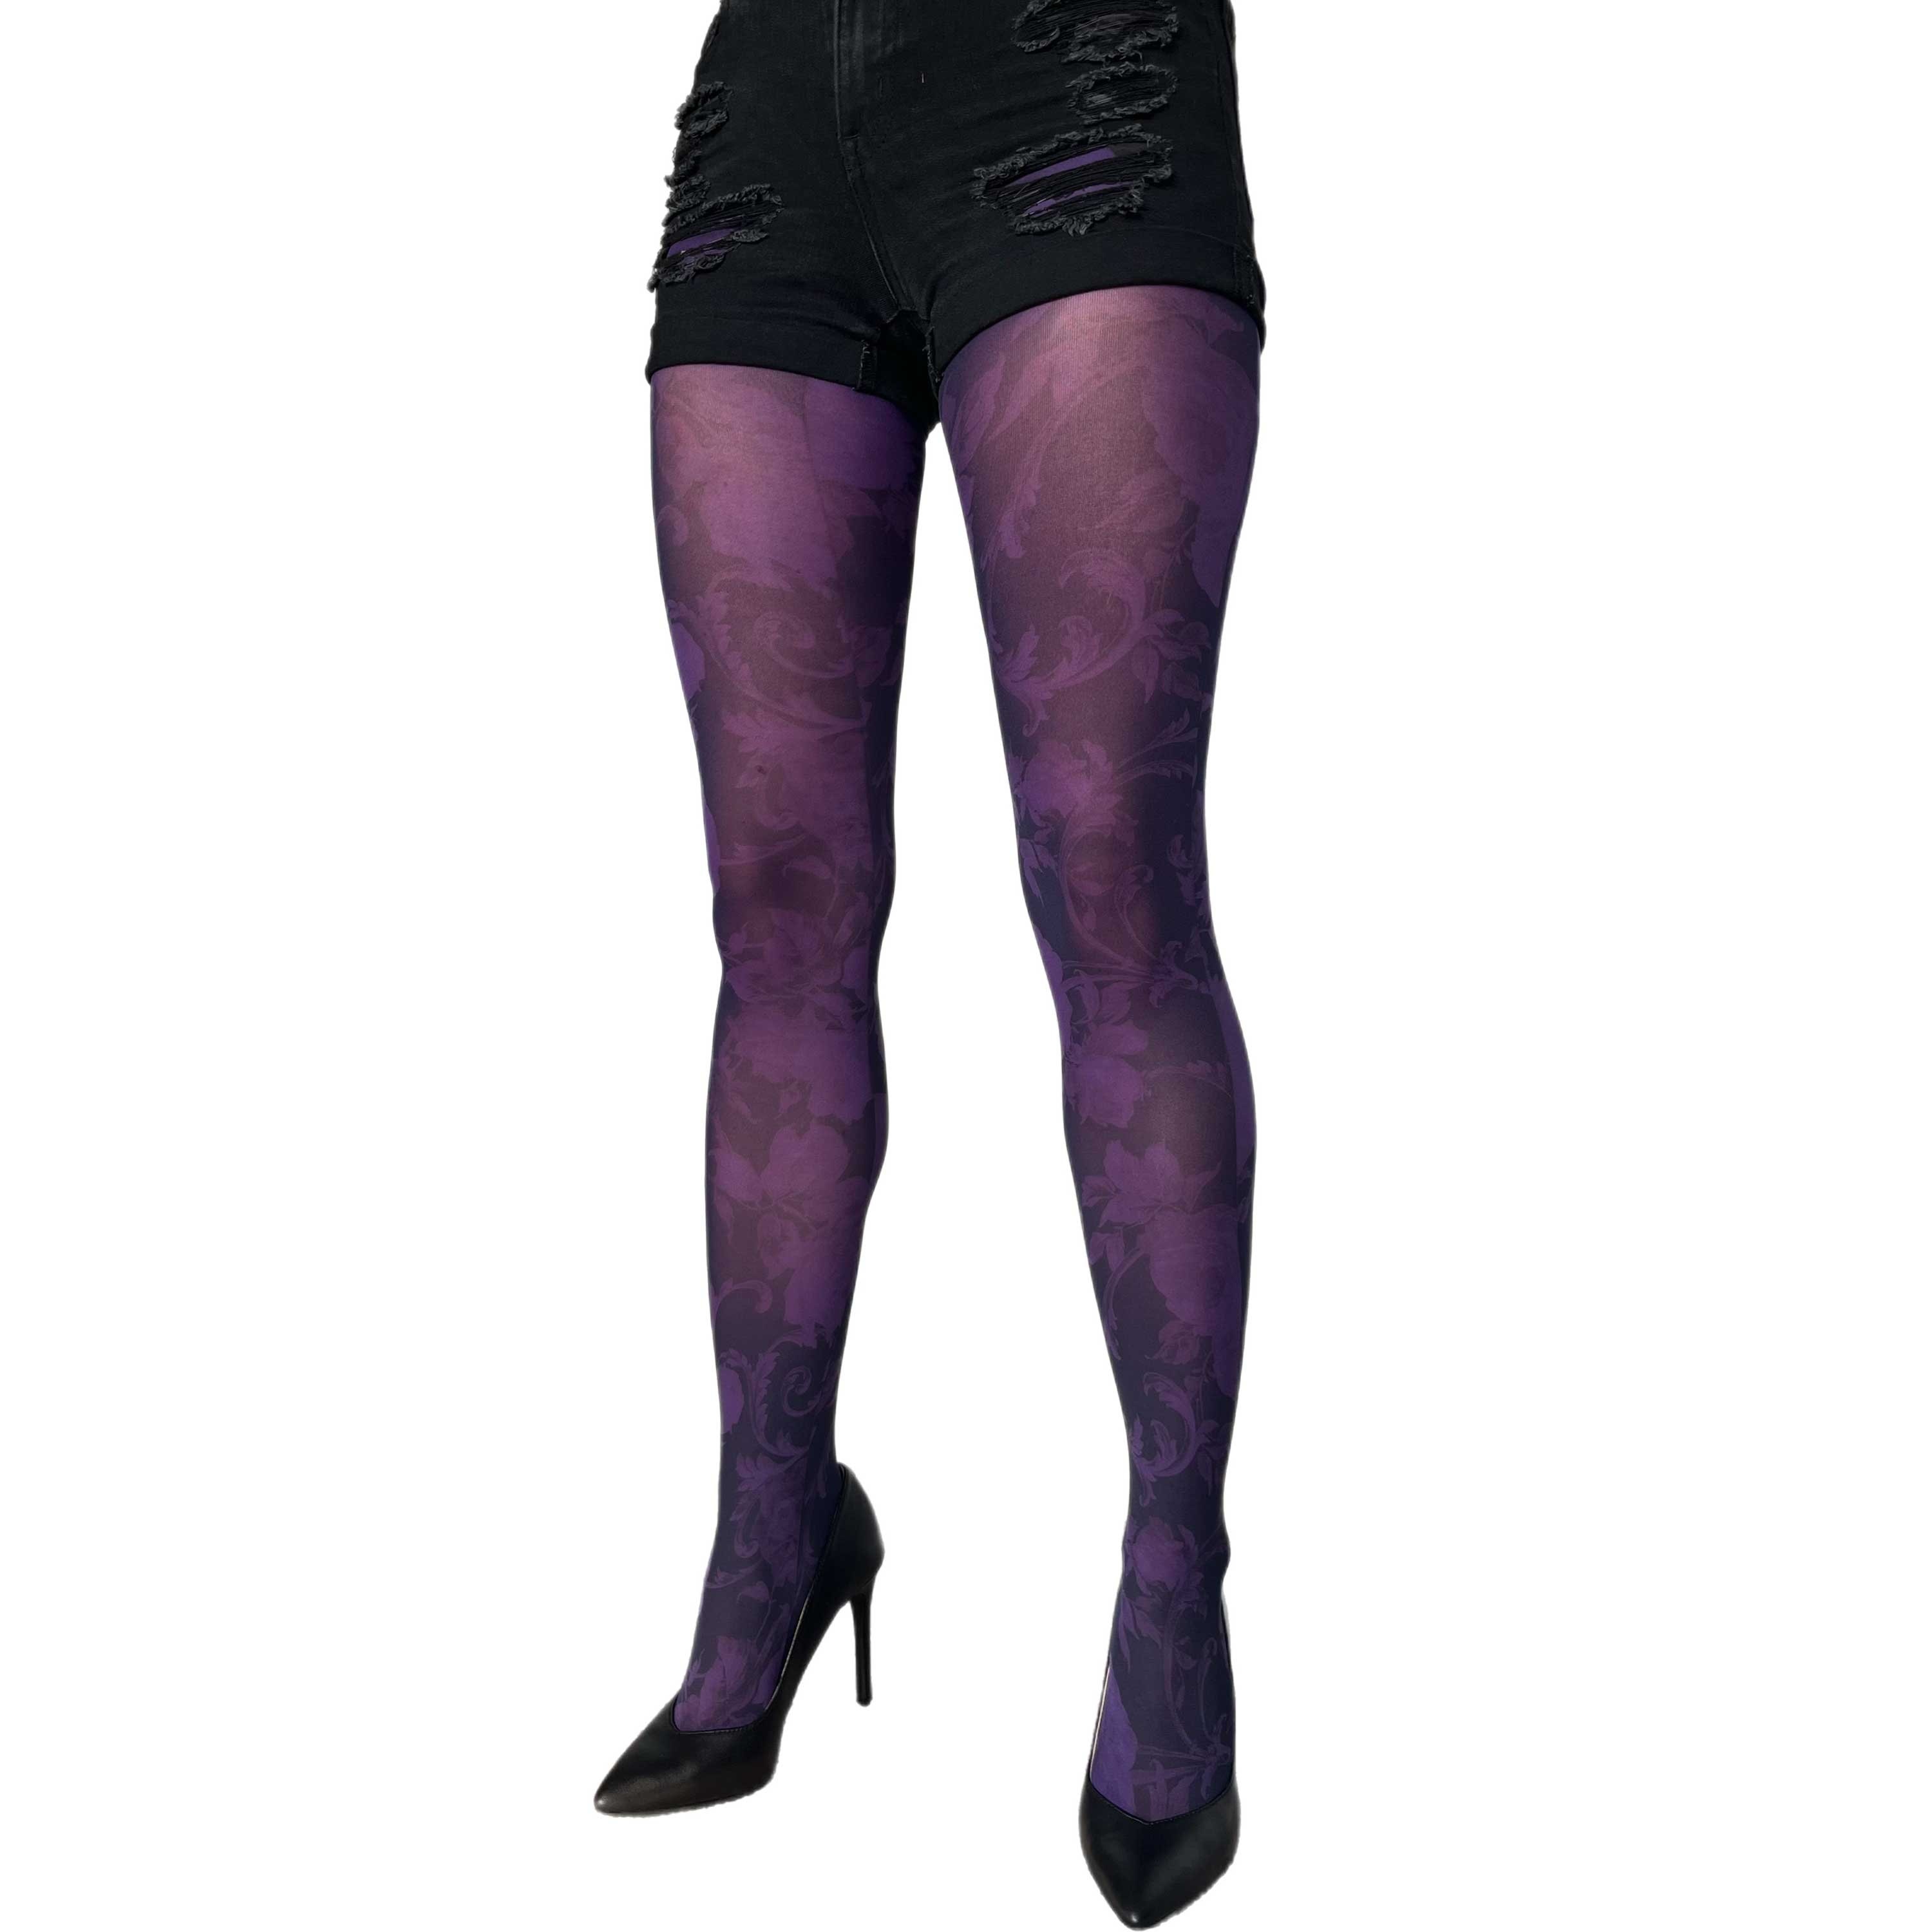 Purple Floral Tights Two-tone Opaque Pantyhose for Women Available